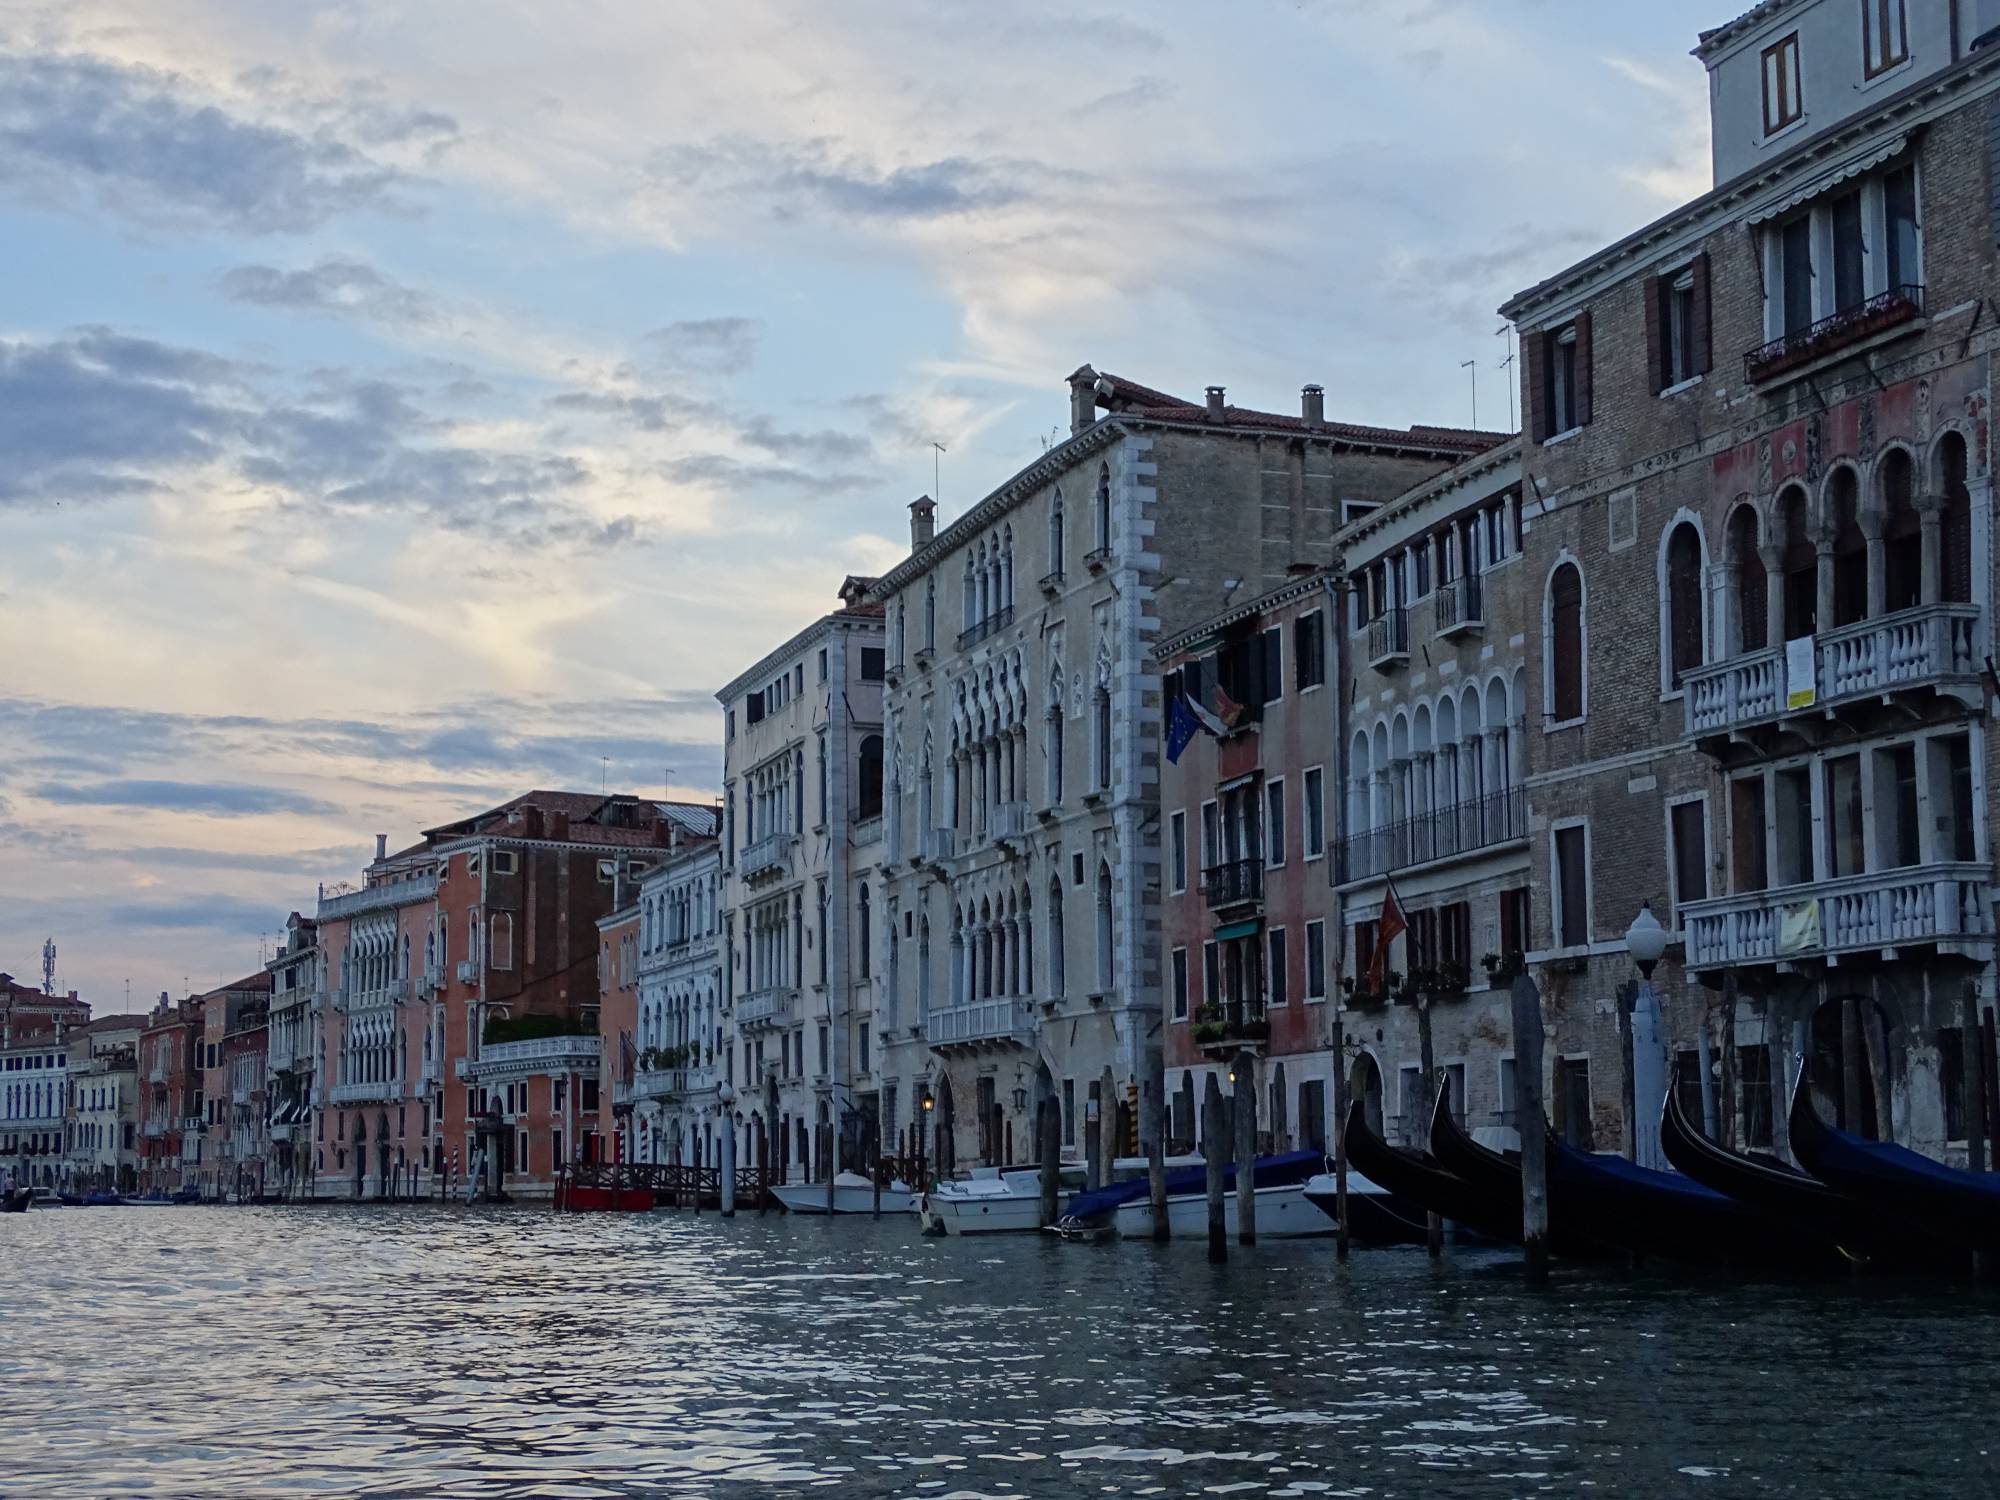 Enjoy an overnight in Venice Italy during the Disney Cruise Line Mediterranean itinerary | PassPorter.com